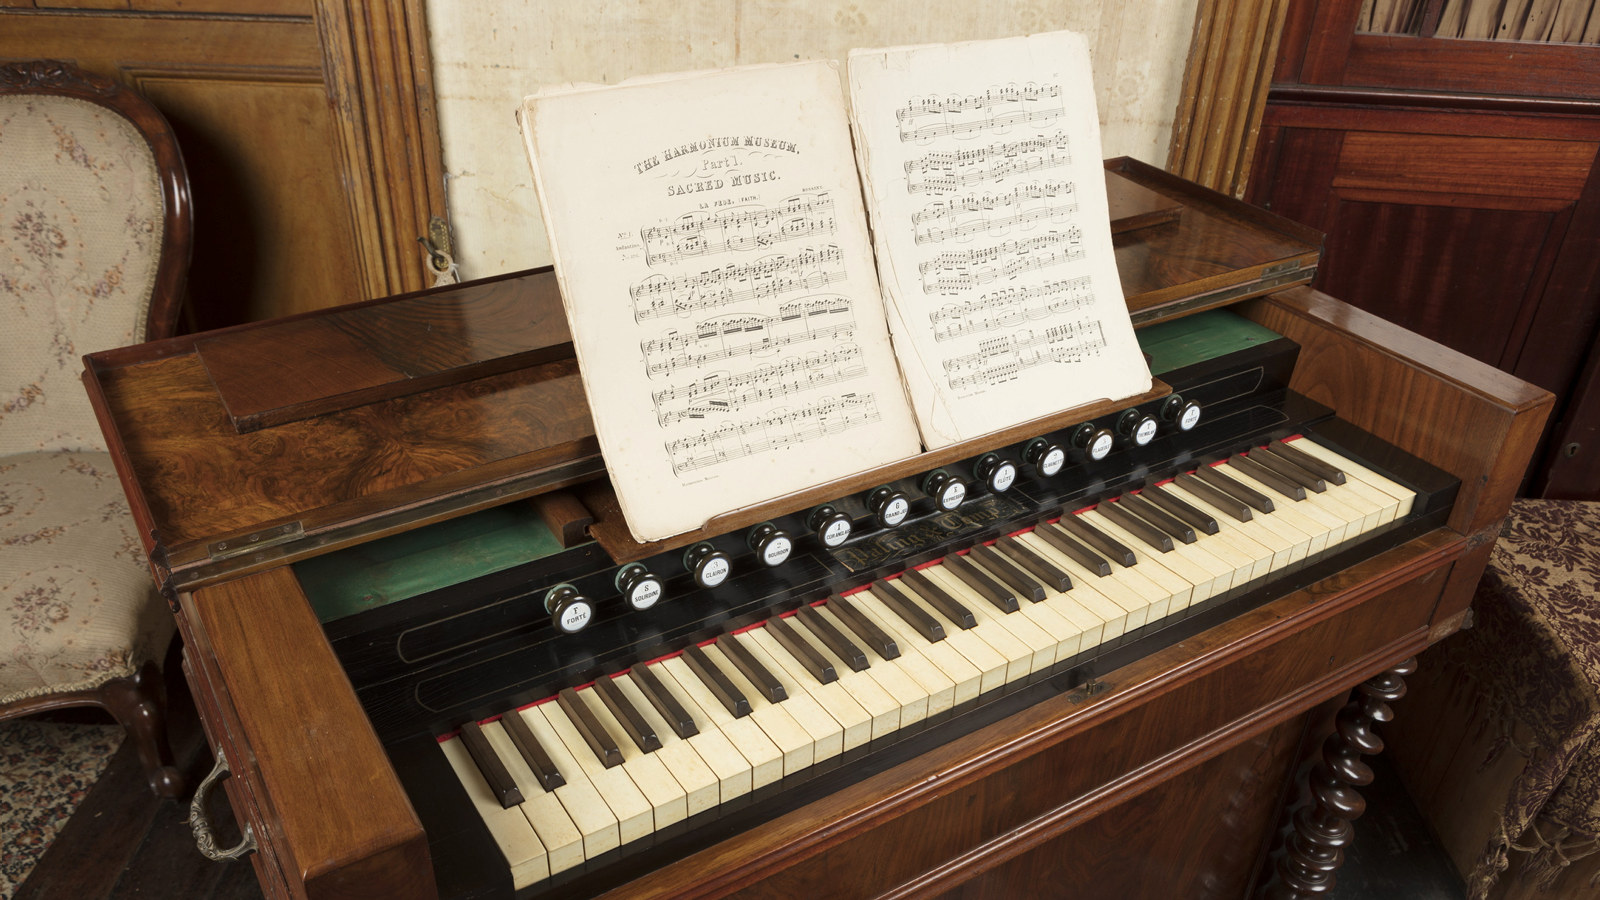 Musical instrument with music book open on stand above keyboard.